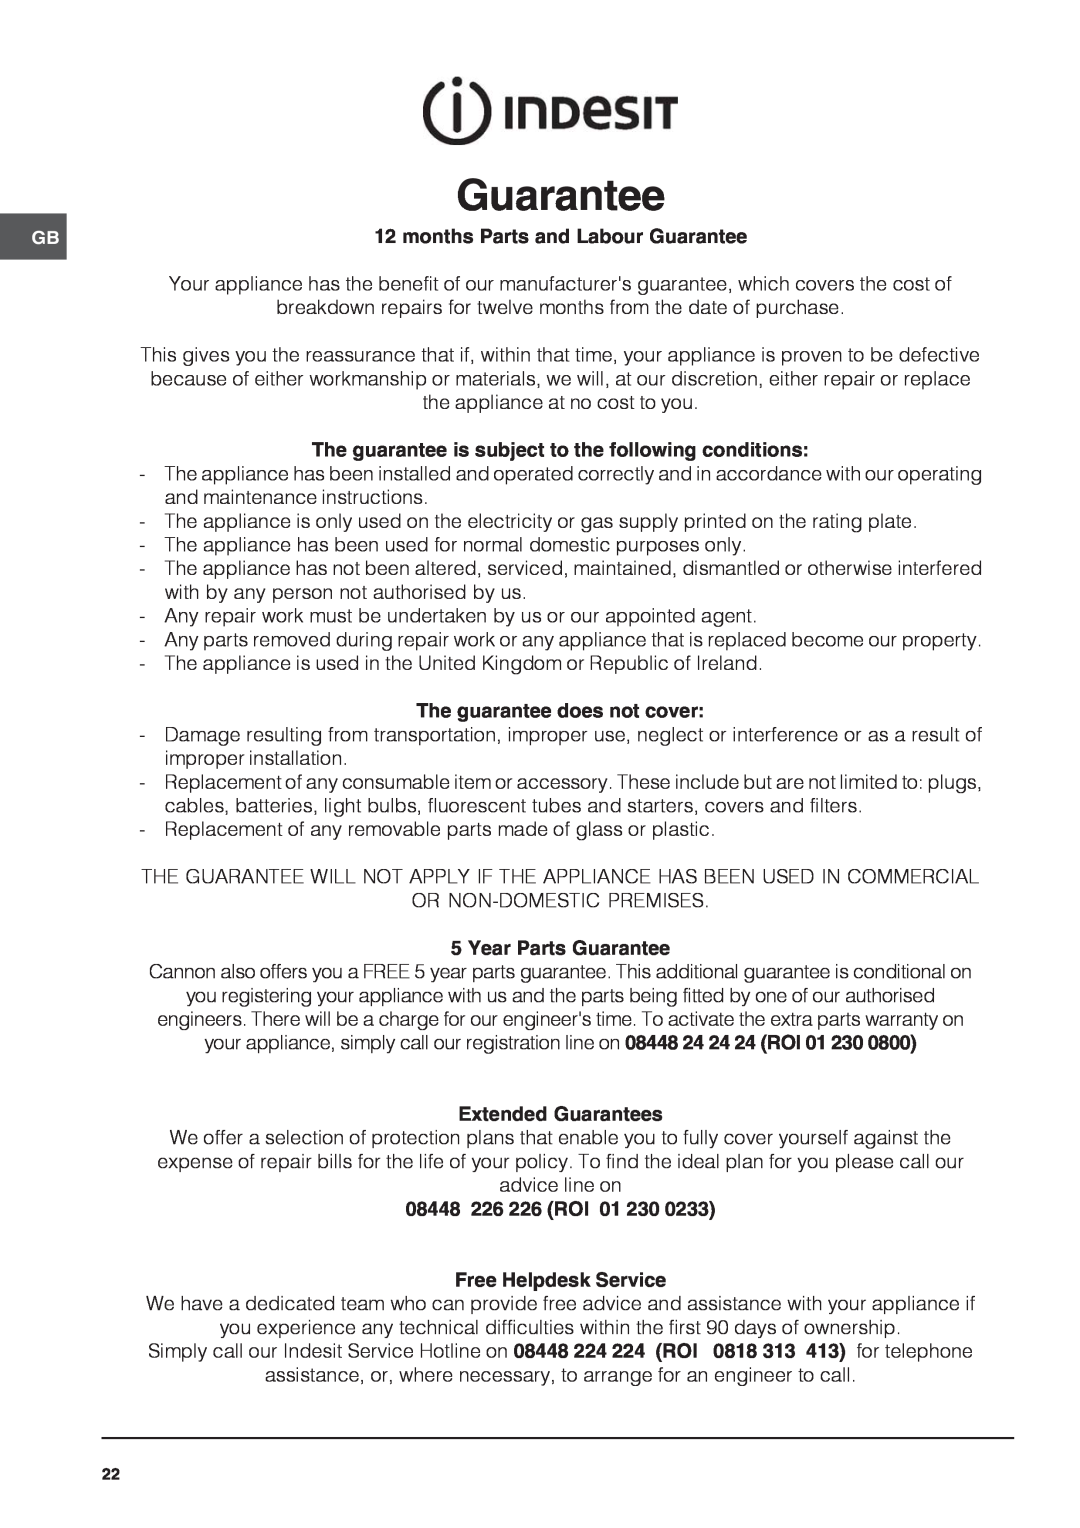 Indesit ID60G2 Guarantee, The guarantee is subject to the following conditions, The guarantee does not cover 